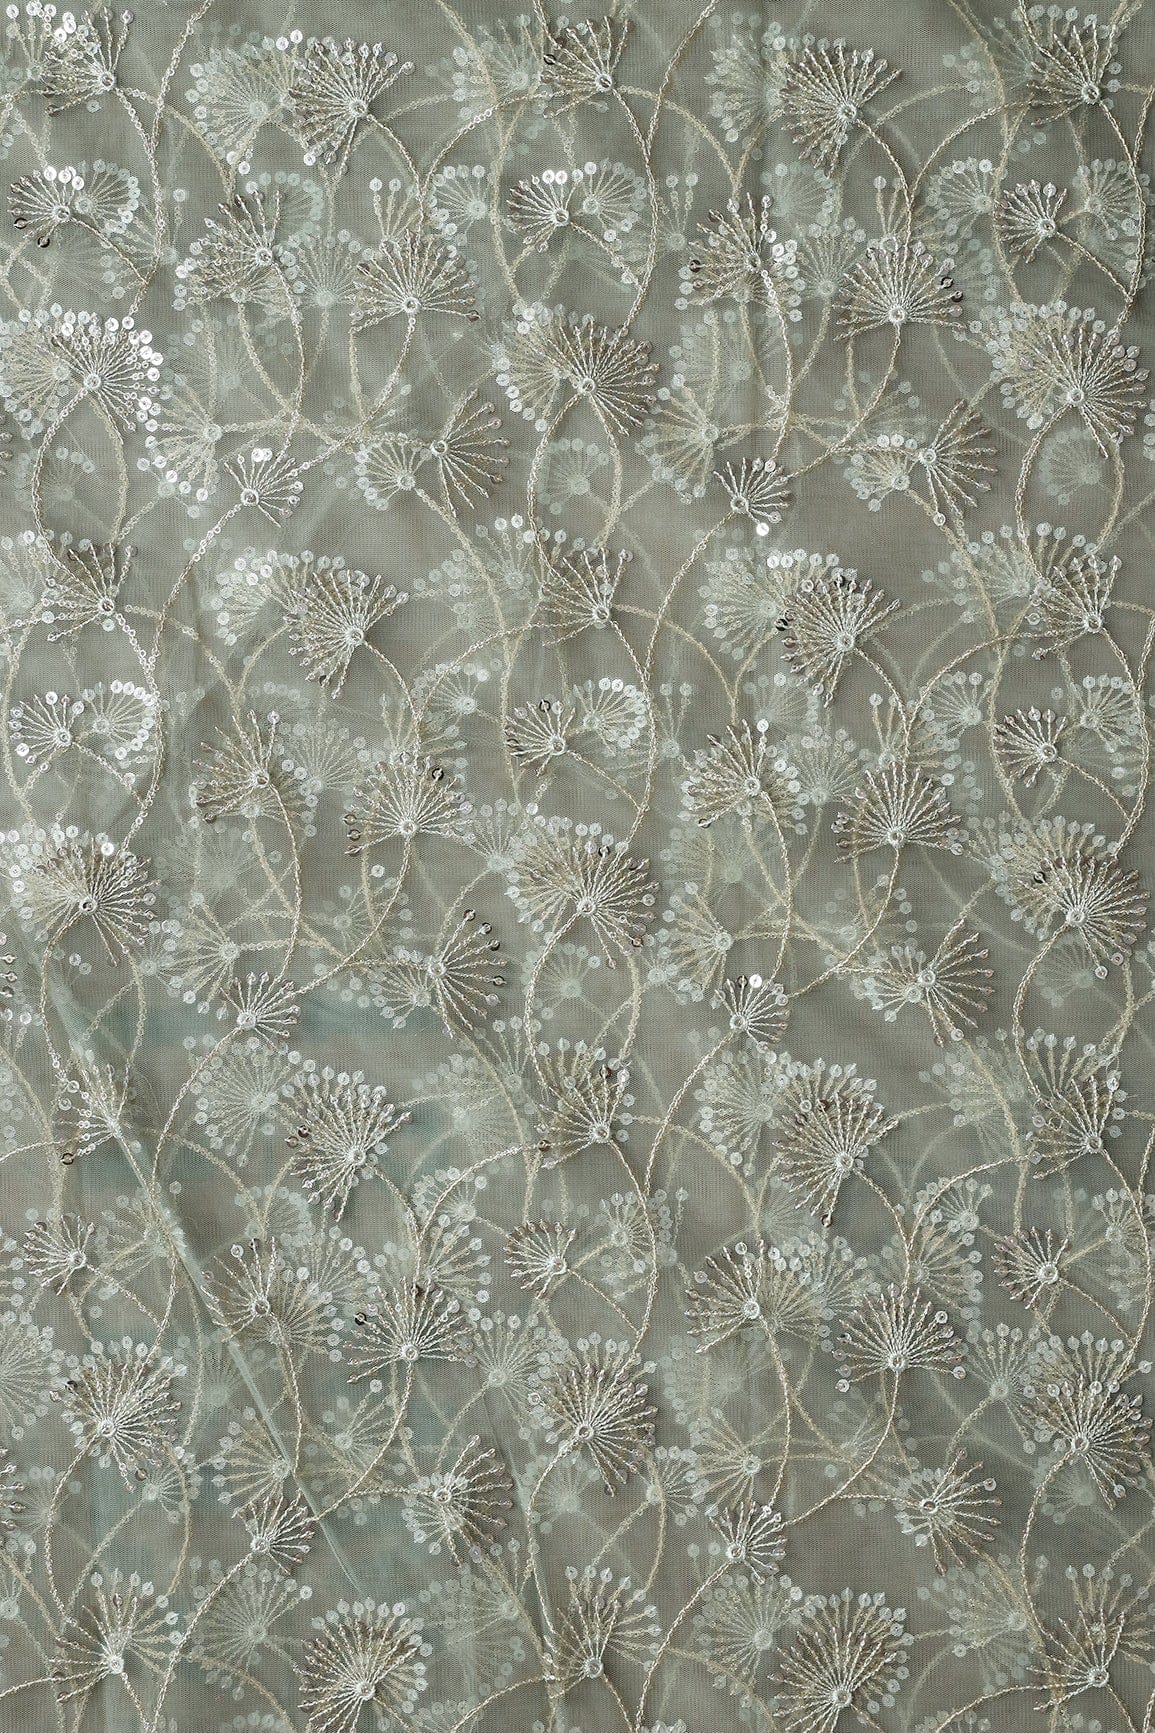 doeraa Embroidery Fabrics 4.25 Meter Cut Piece Of Olive Thread With Gold And Silver Sequins Floral Embroidery On Olive Soft Net Fabric